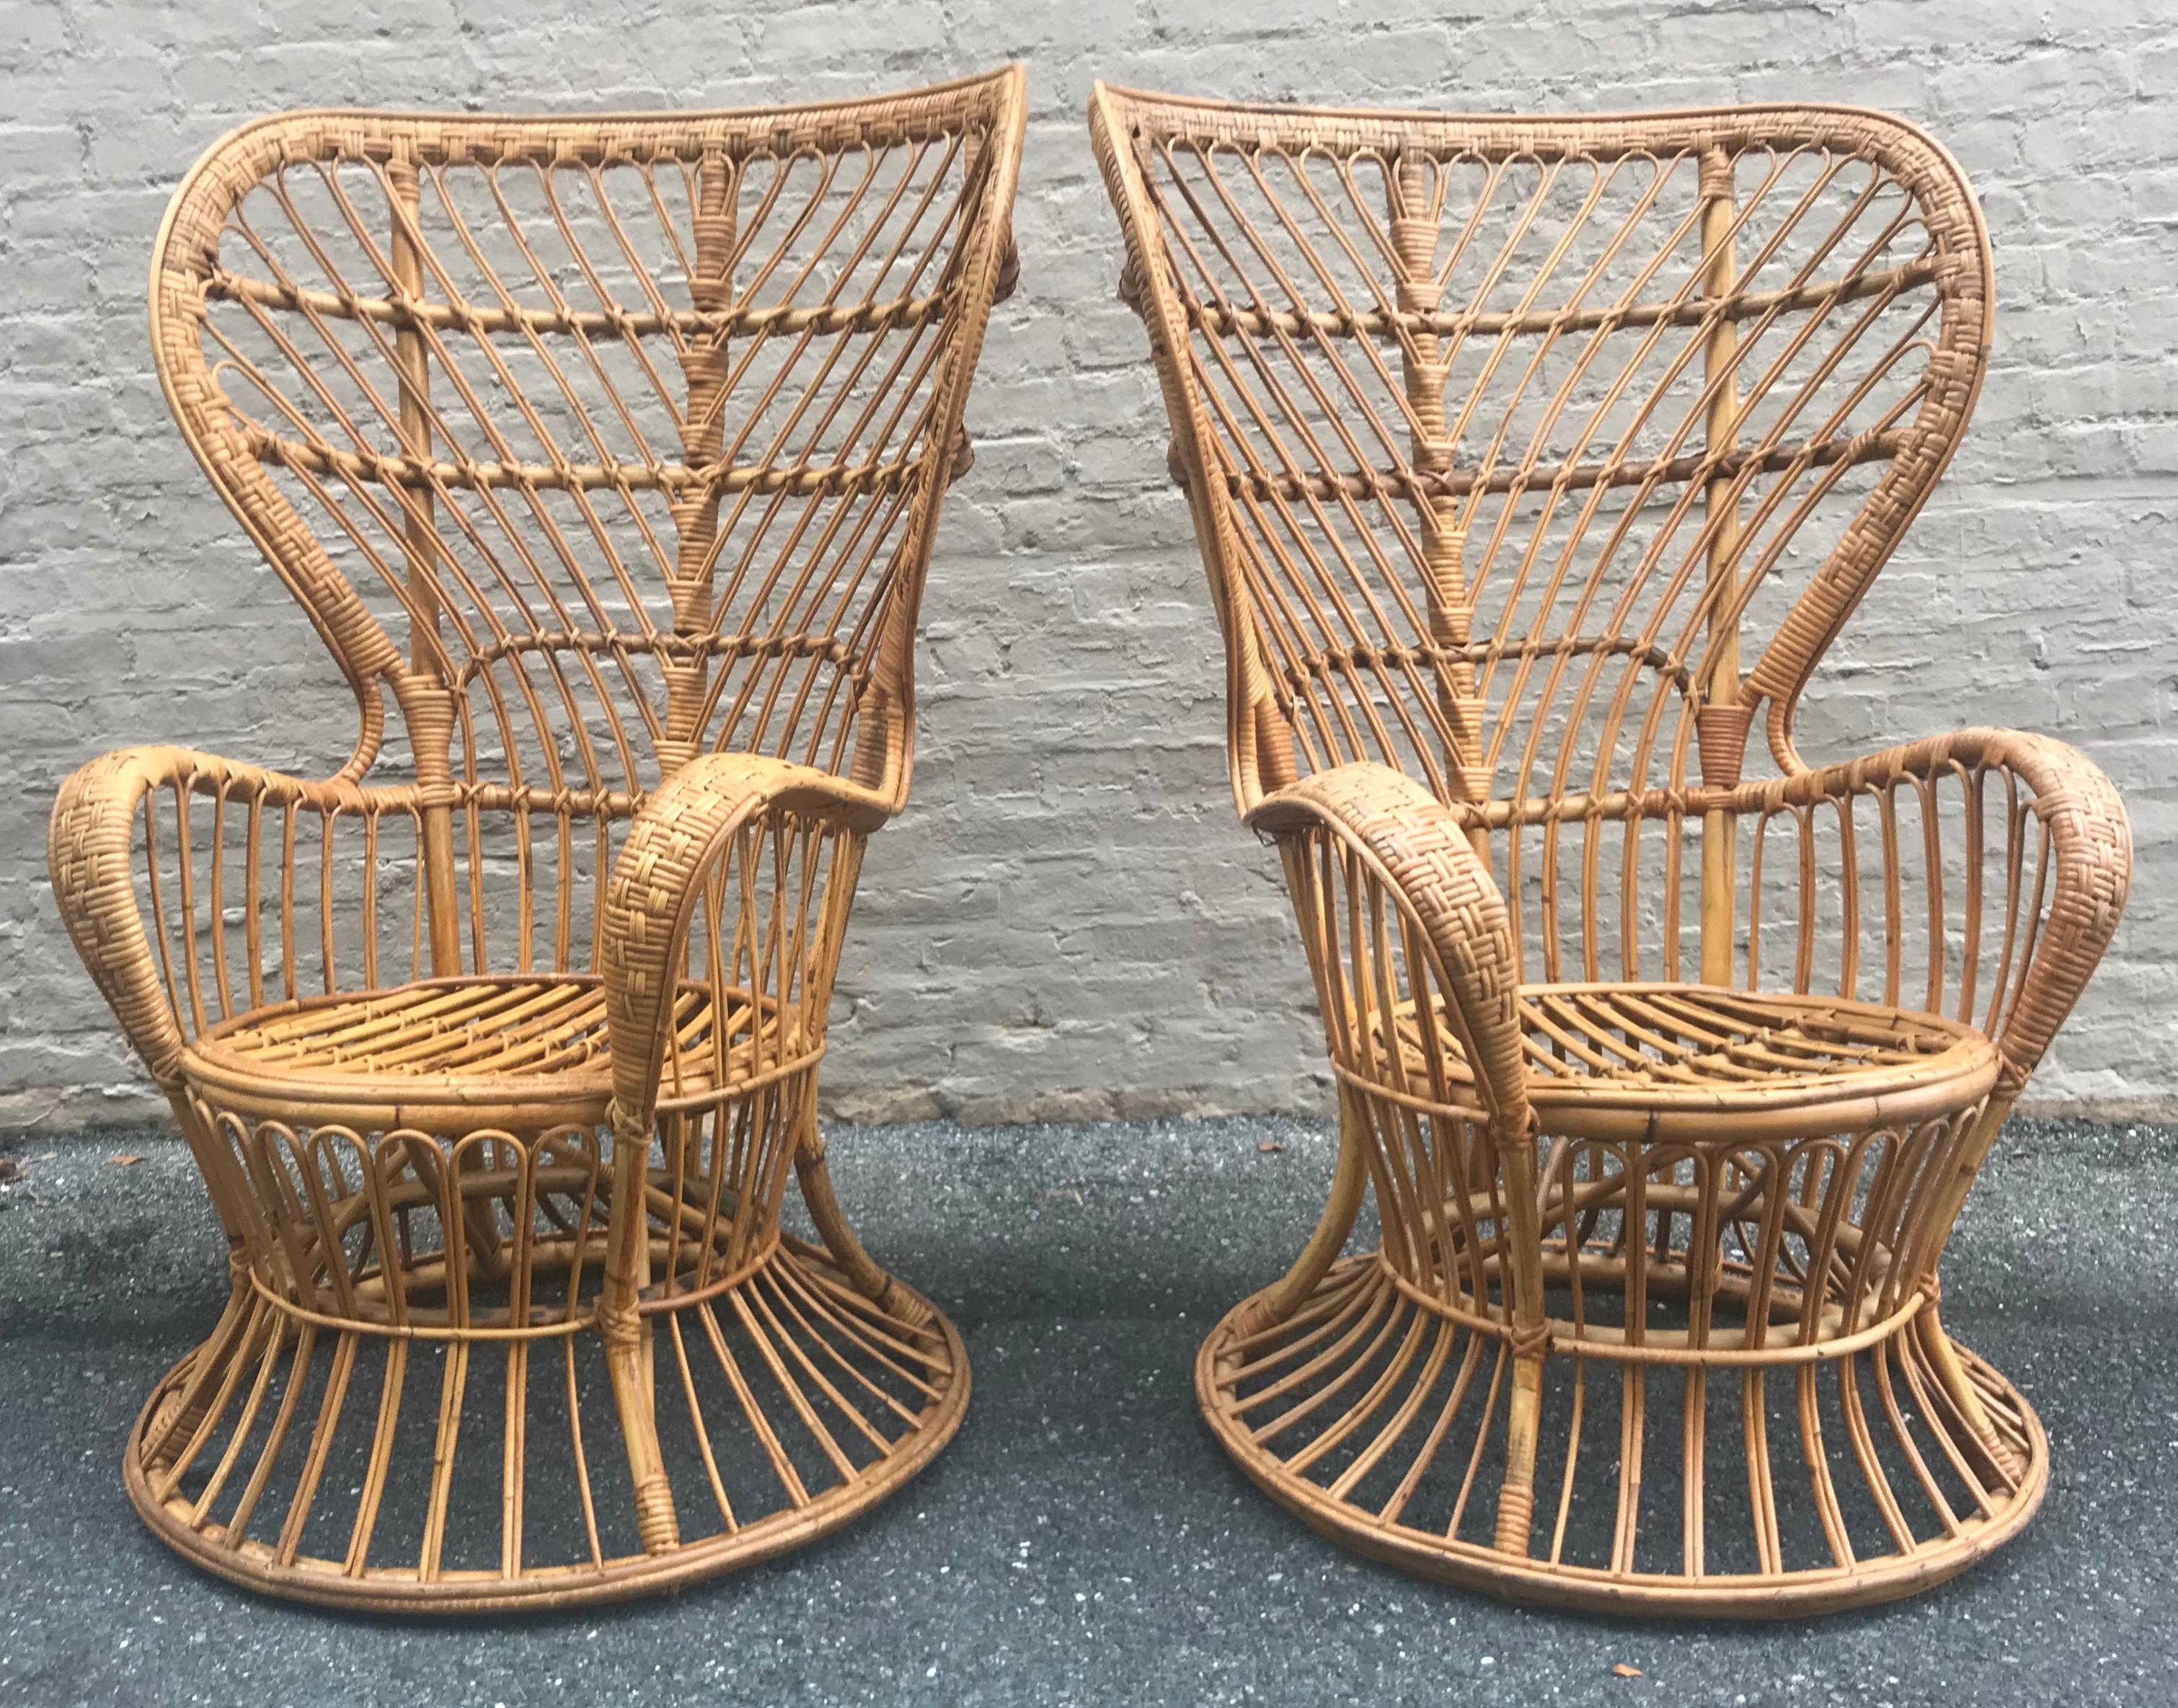 Wonderful large-scale pair of woven rattan lounge chair designed by Lio Carminati, some of which were used in a Gio Ponti designed luxury cruiseship, 